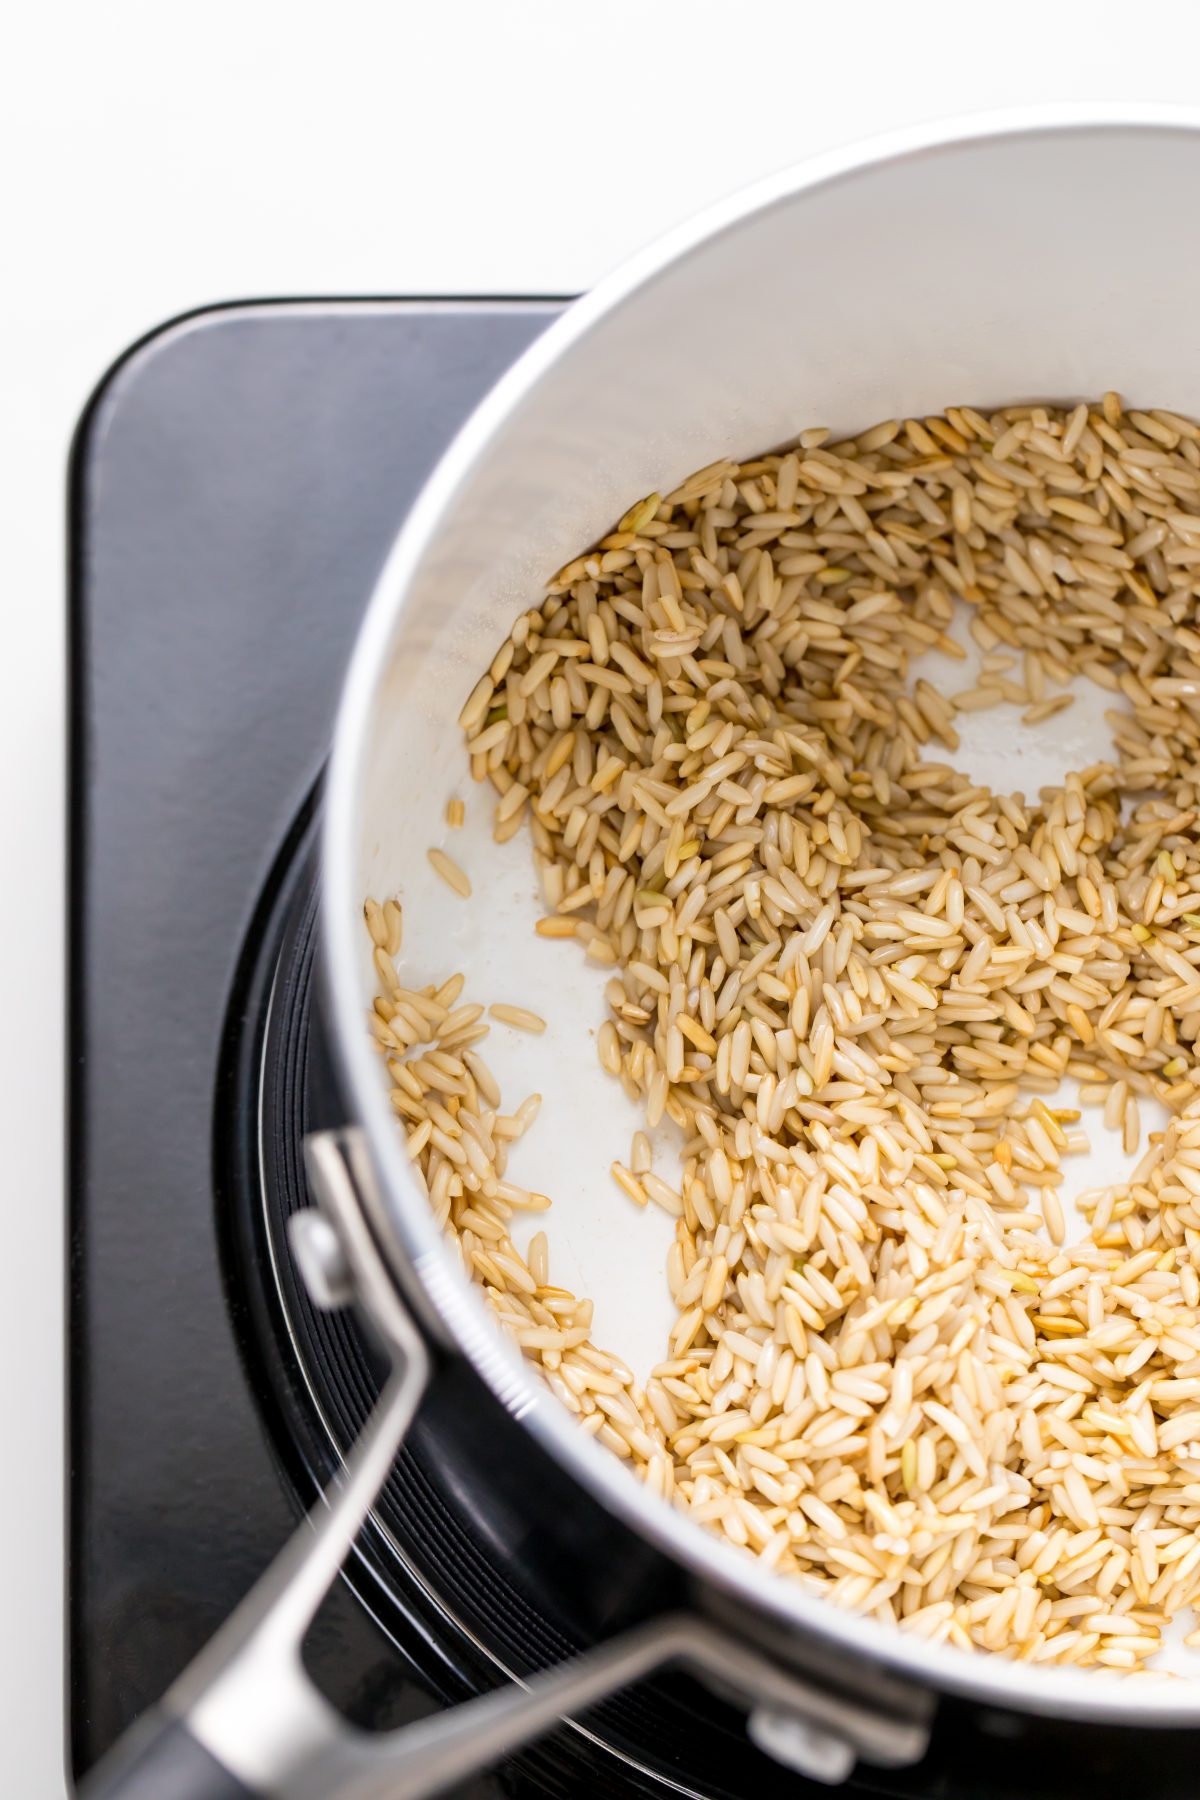 The secret to delicious brown rice